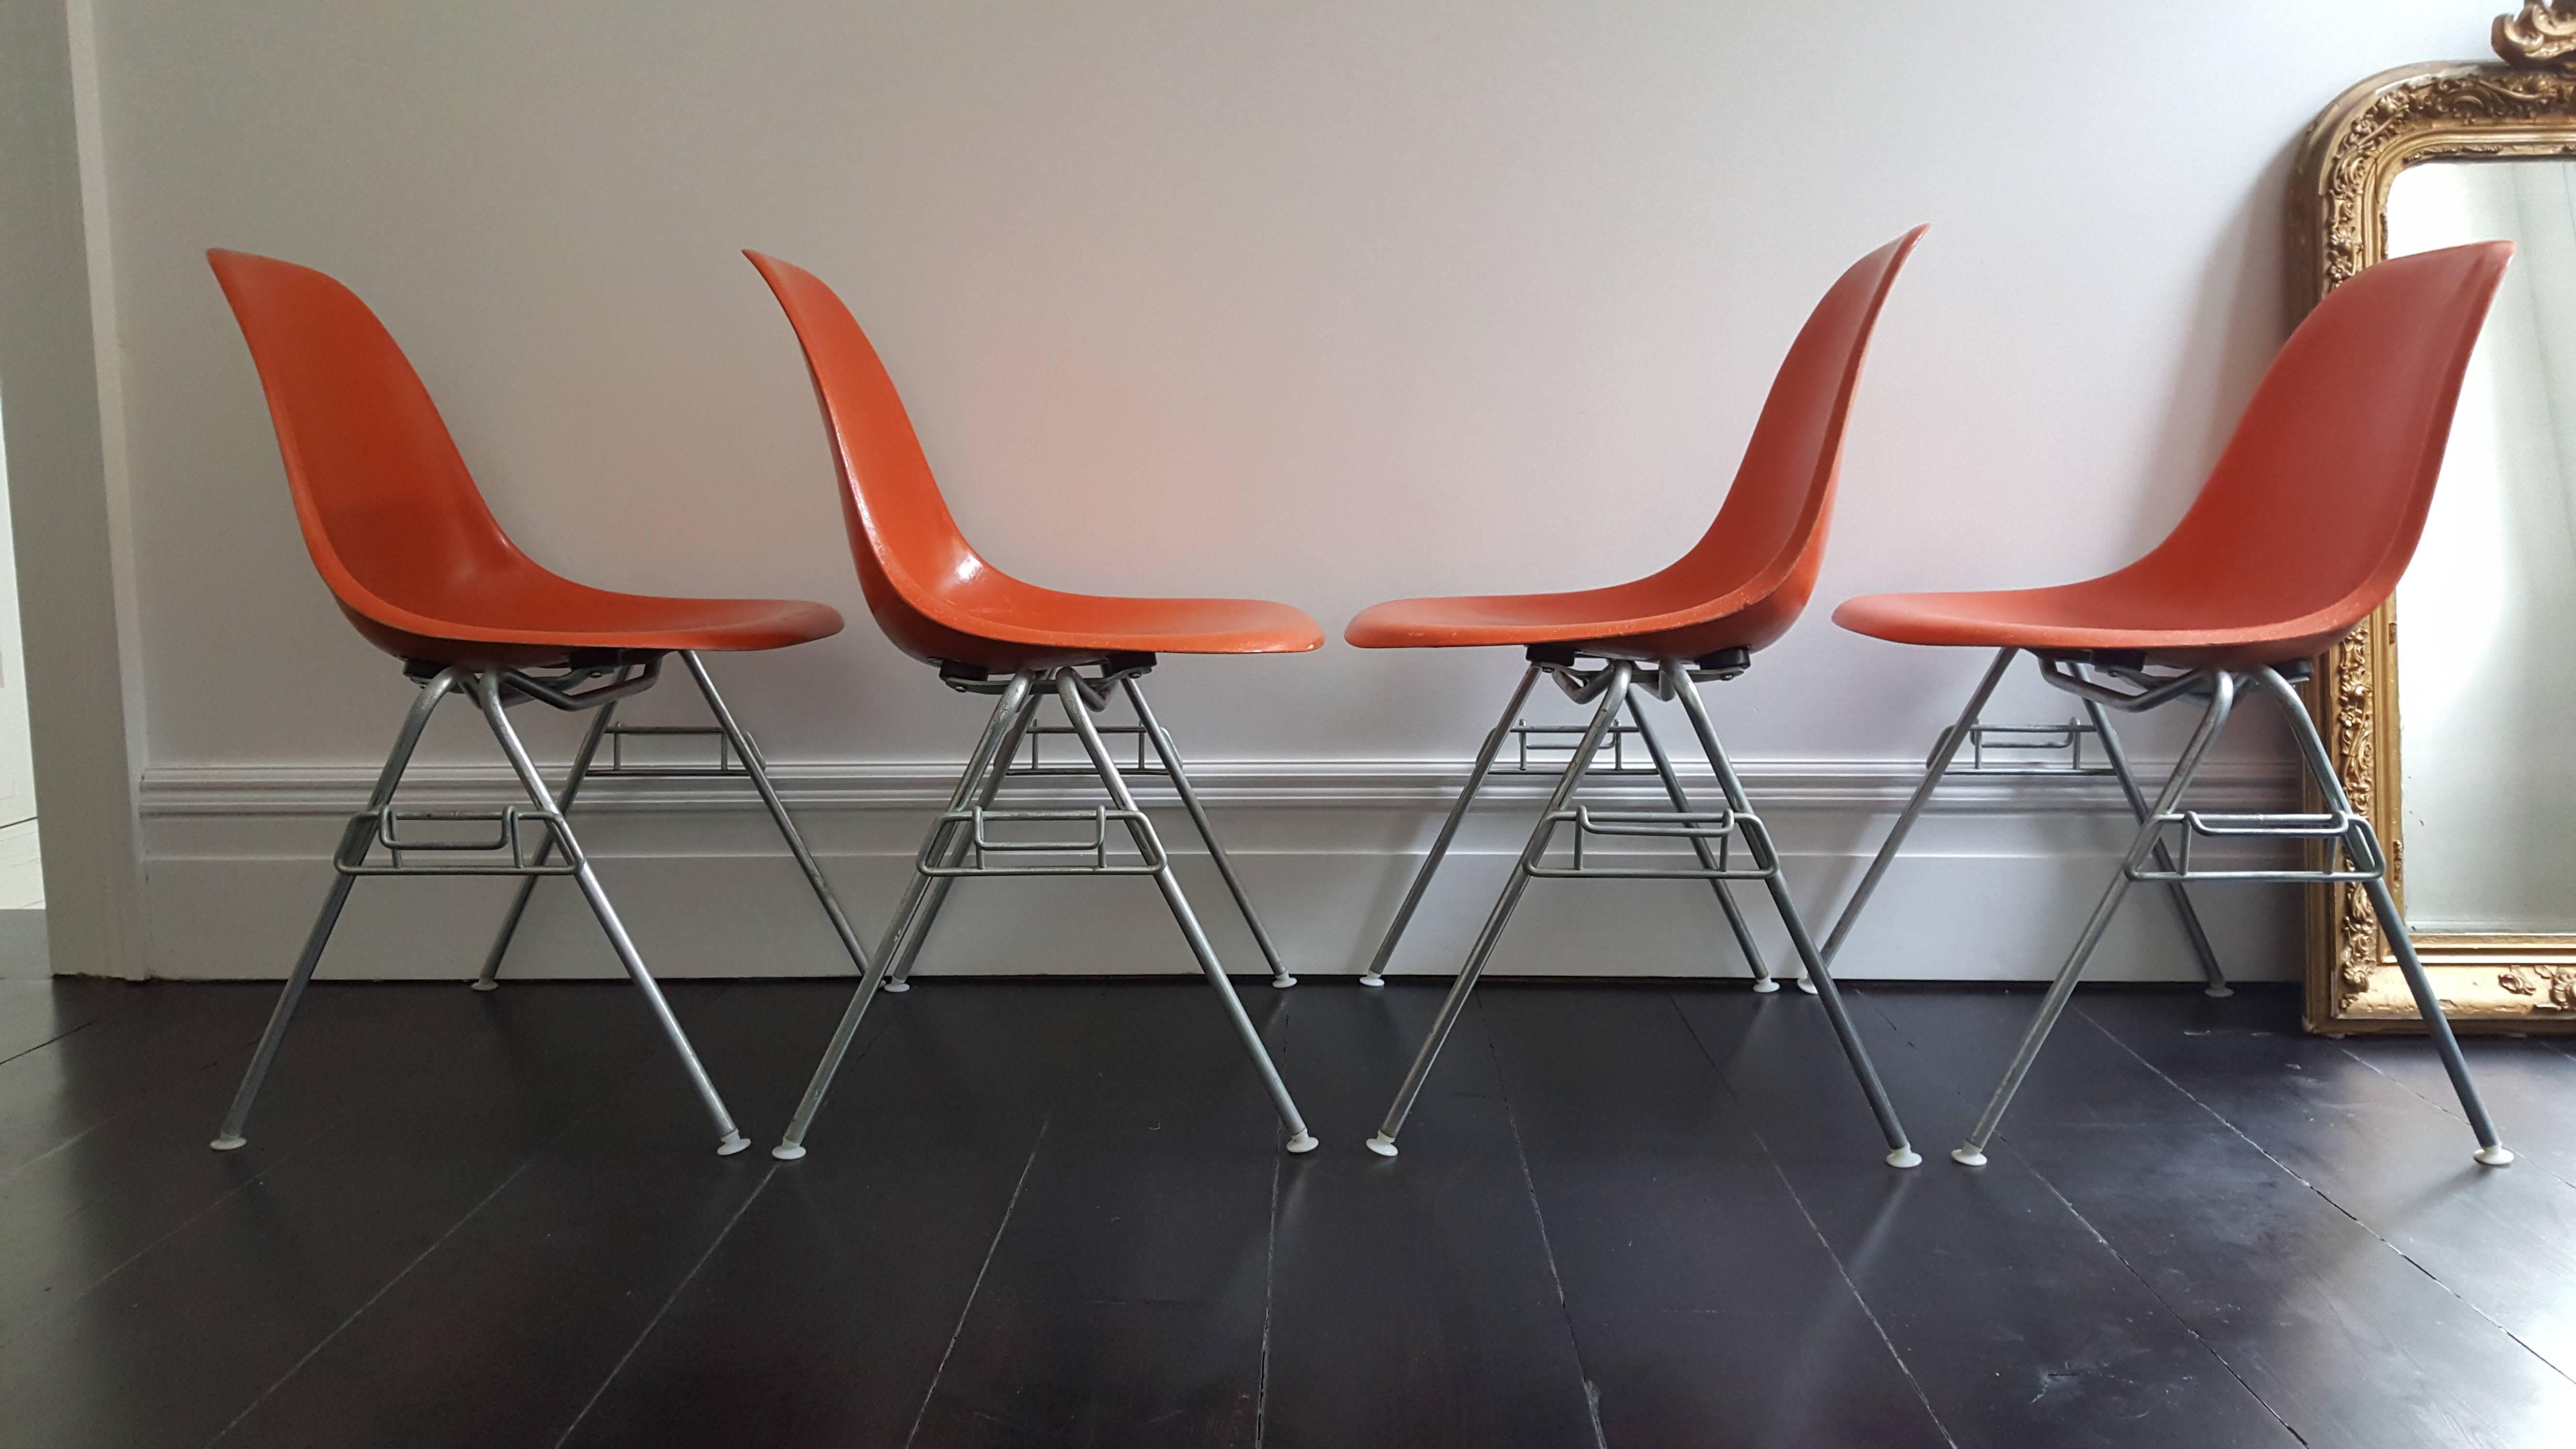 Classic icons, a set of four vibrant orange fiberglass Charles and Ray Eames designed Herman Miller DSS chairs on matt steel stacking bases.

Great provenance, these came out of Wayne State College Nebraska with labels reflecting this - great